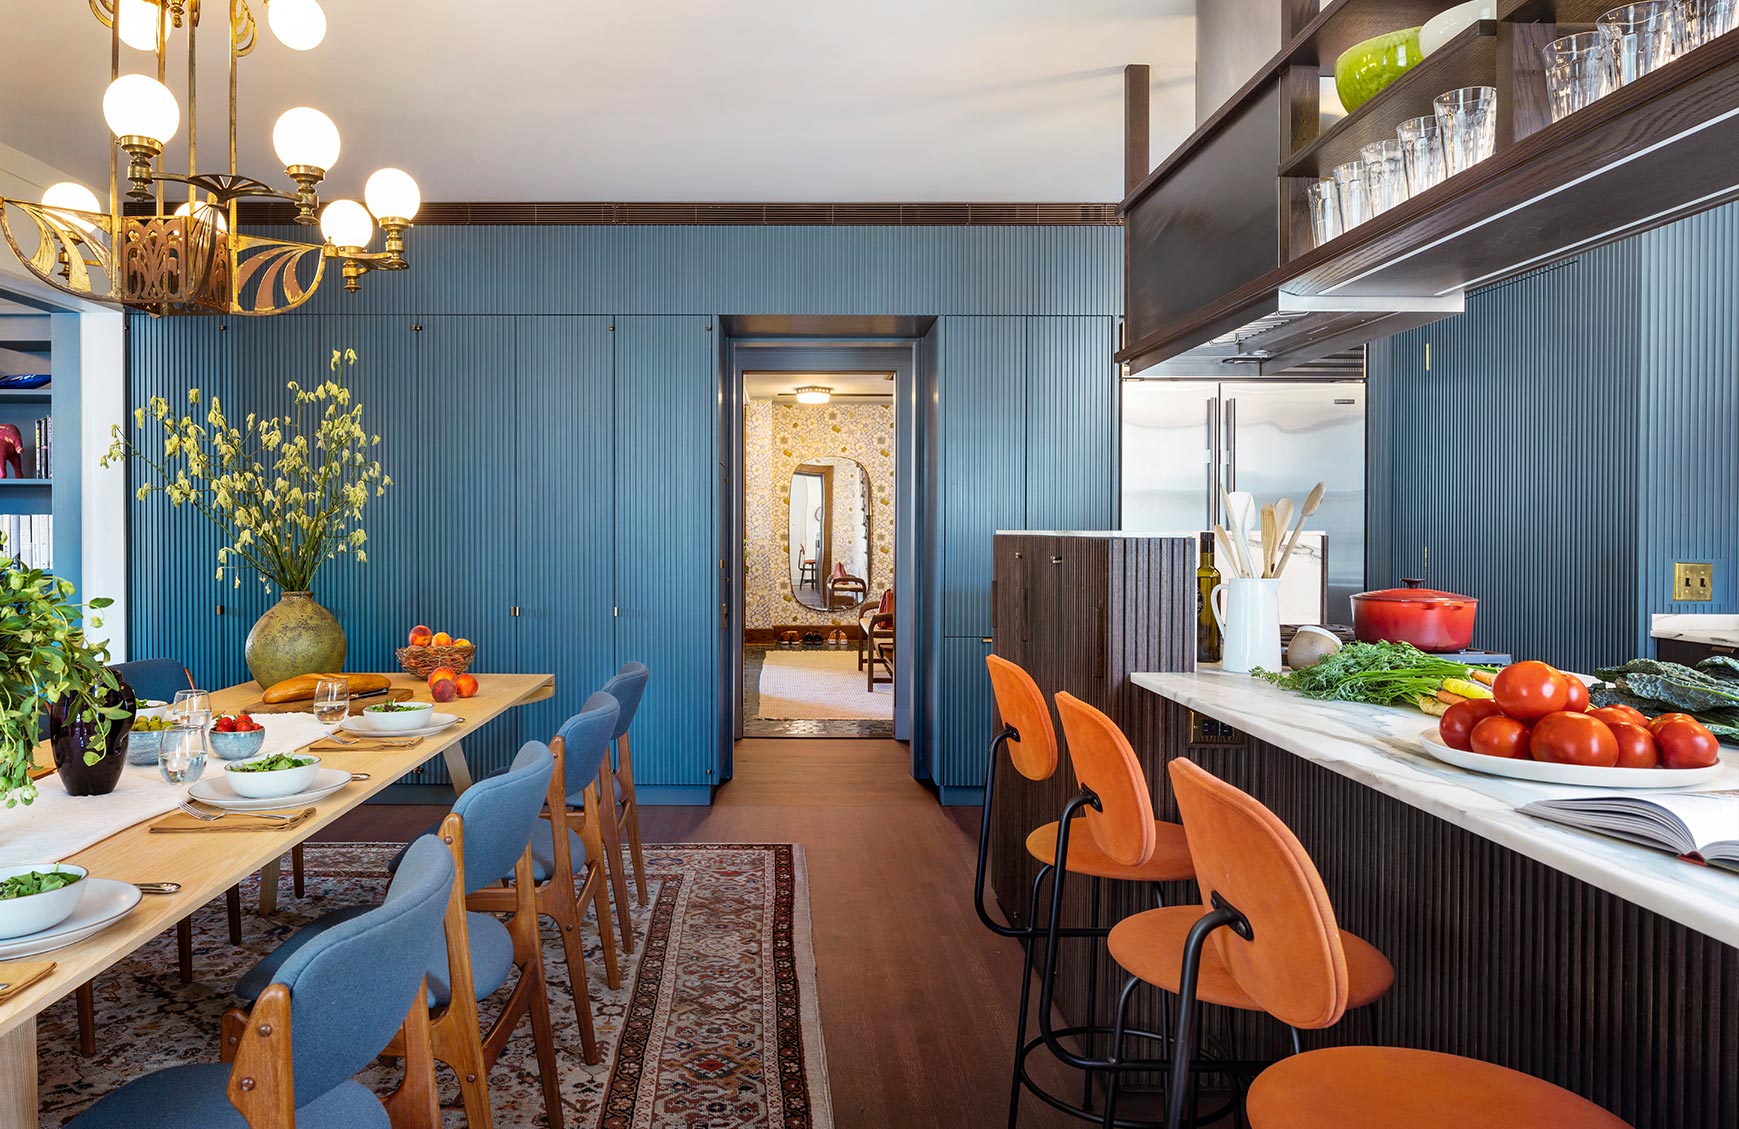 A renovation and restoration of a pre-war apartment is adapted to better serve a modern family's needs.